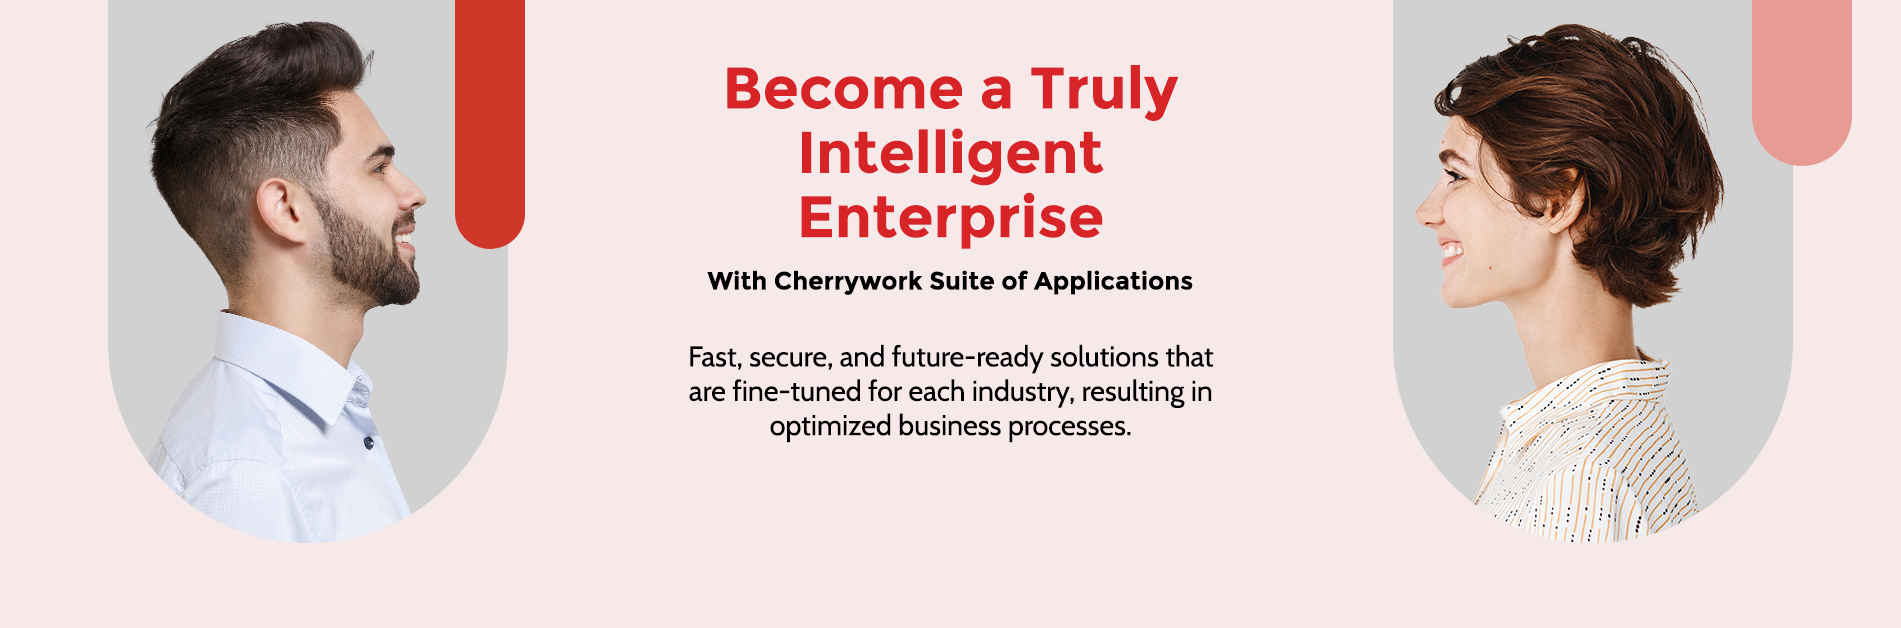 Become a Truly Intelligent Enterprise with Cherrywork Suite of Applications